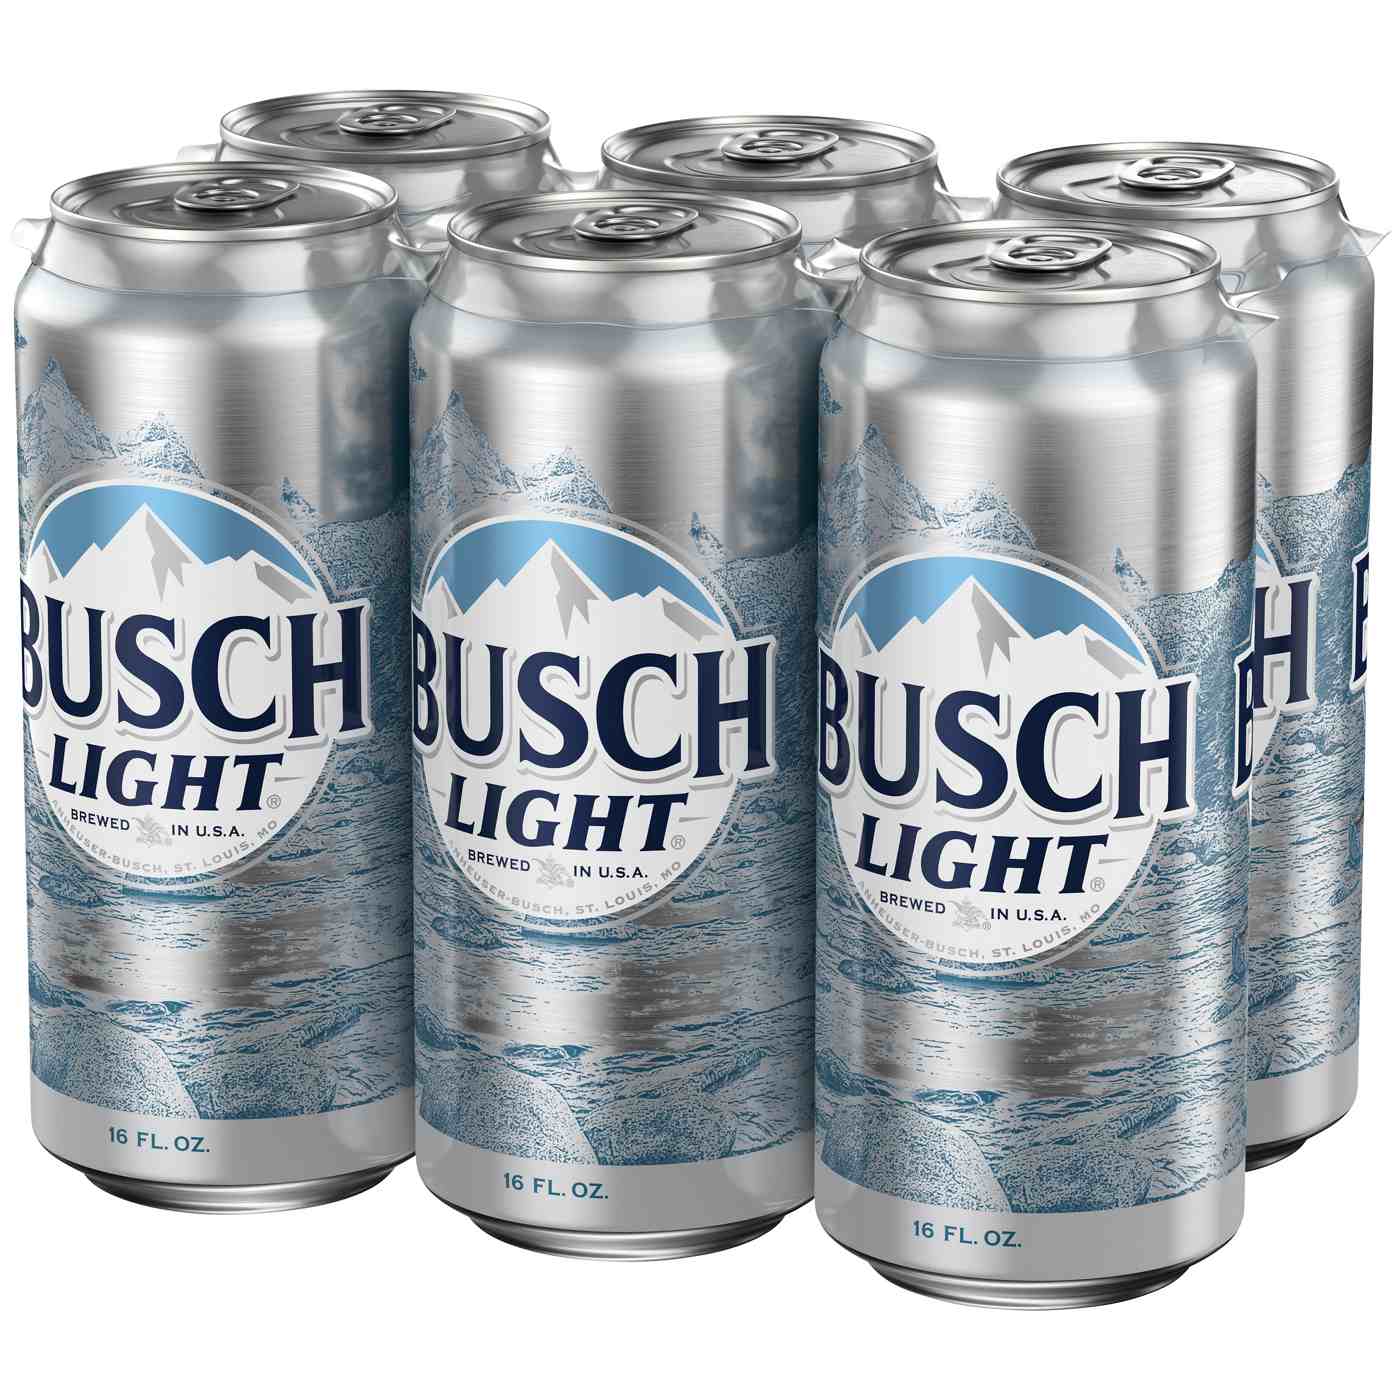 Busch Light Beer 6 pk Cans; image 2 of 4